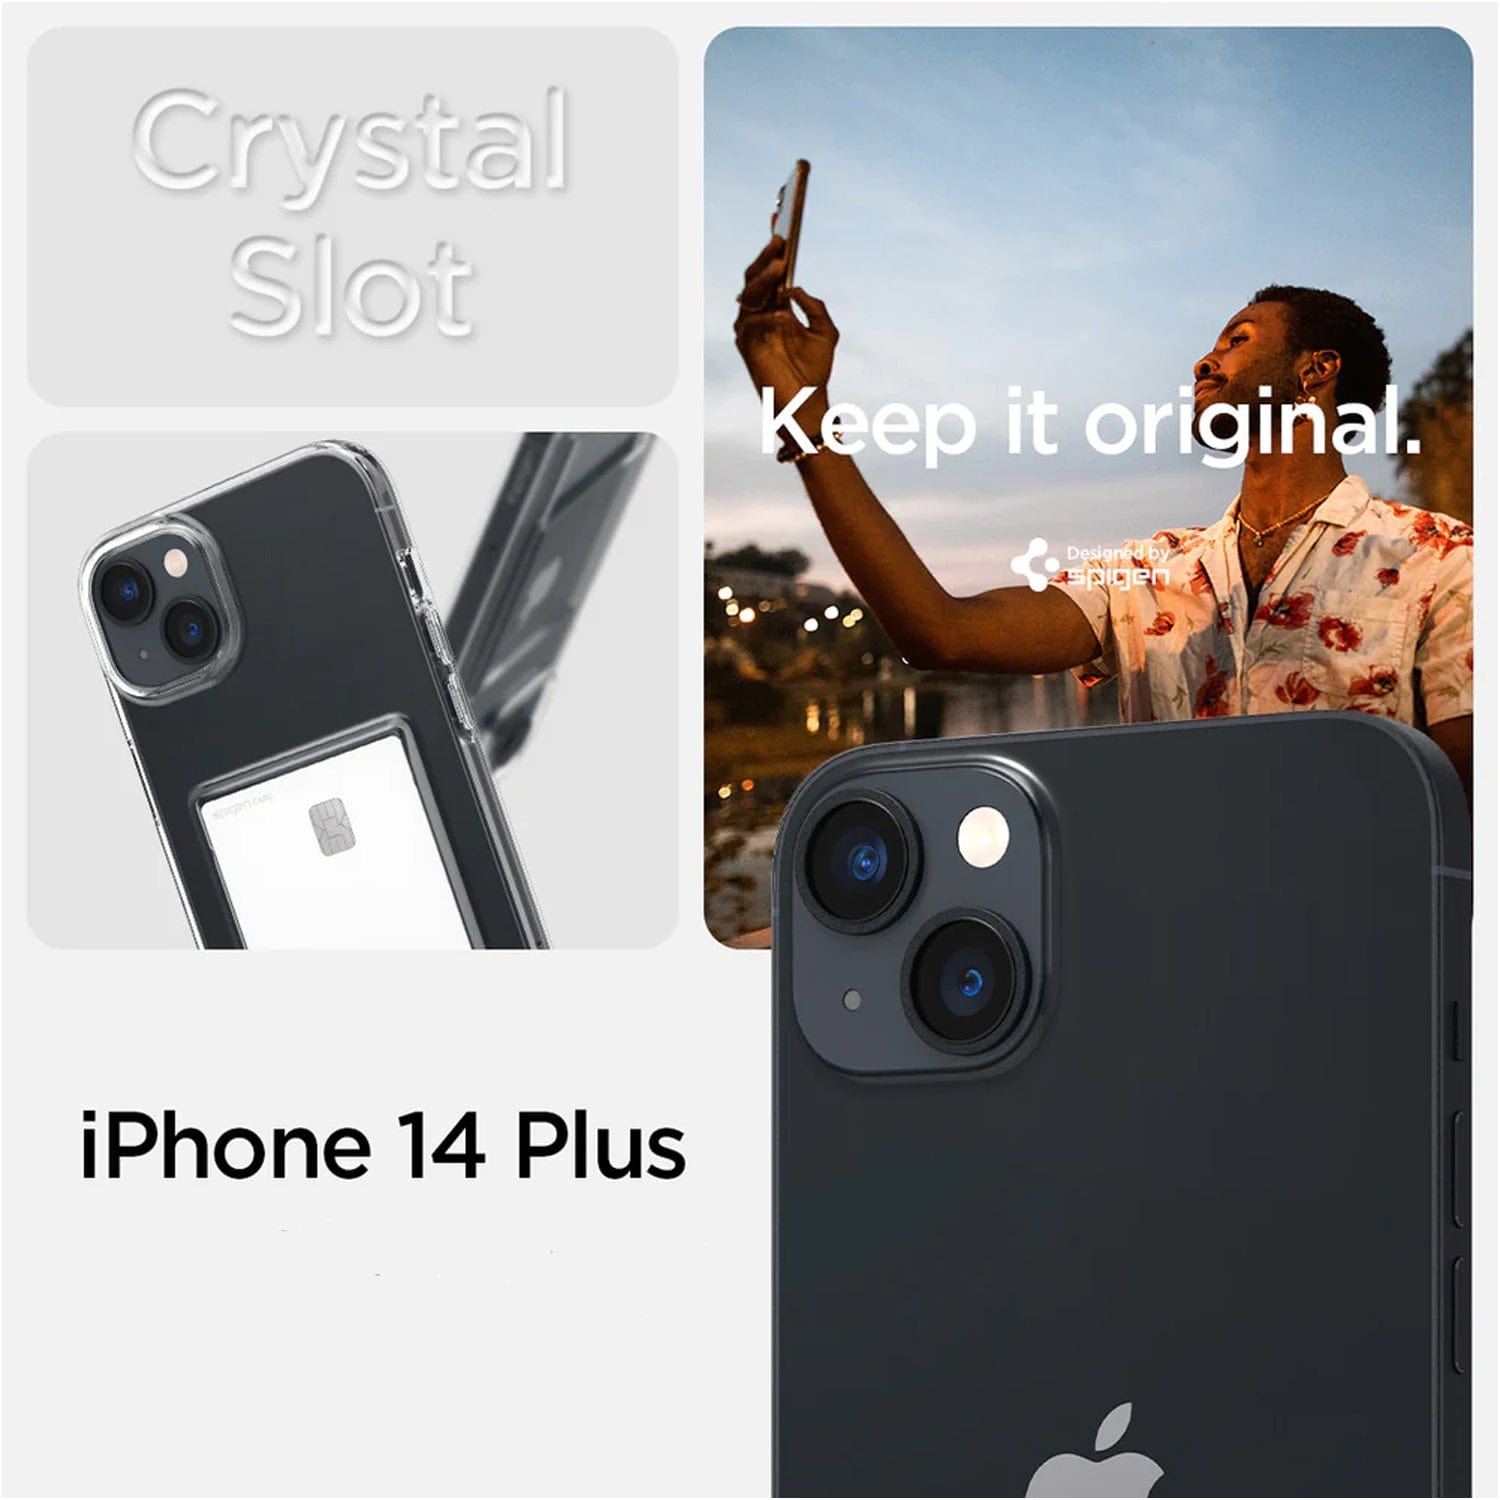 Spigen Crystal Slot Case for iPhone 14 Series iPhone 14 Plus / Crystal Clear